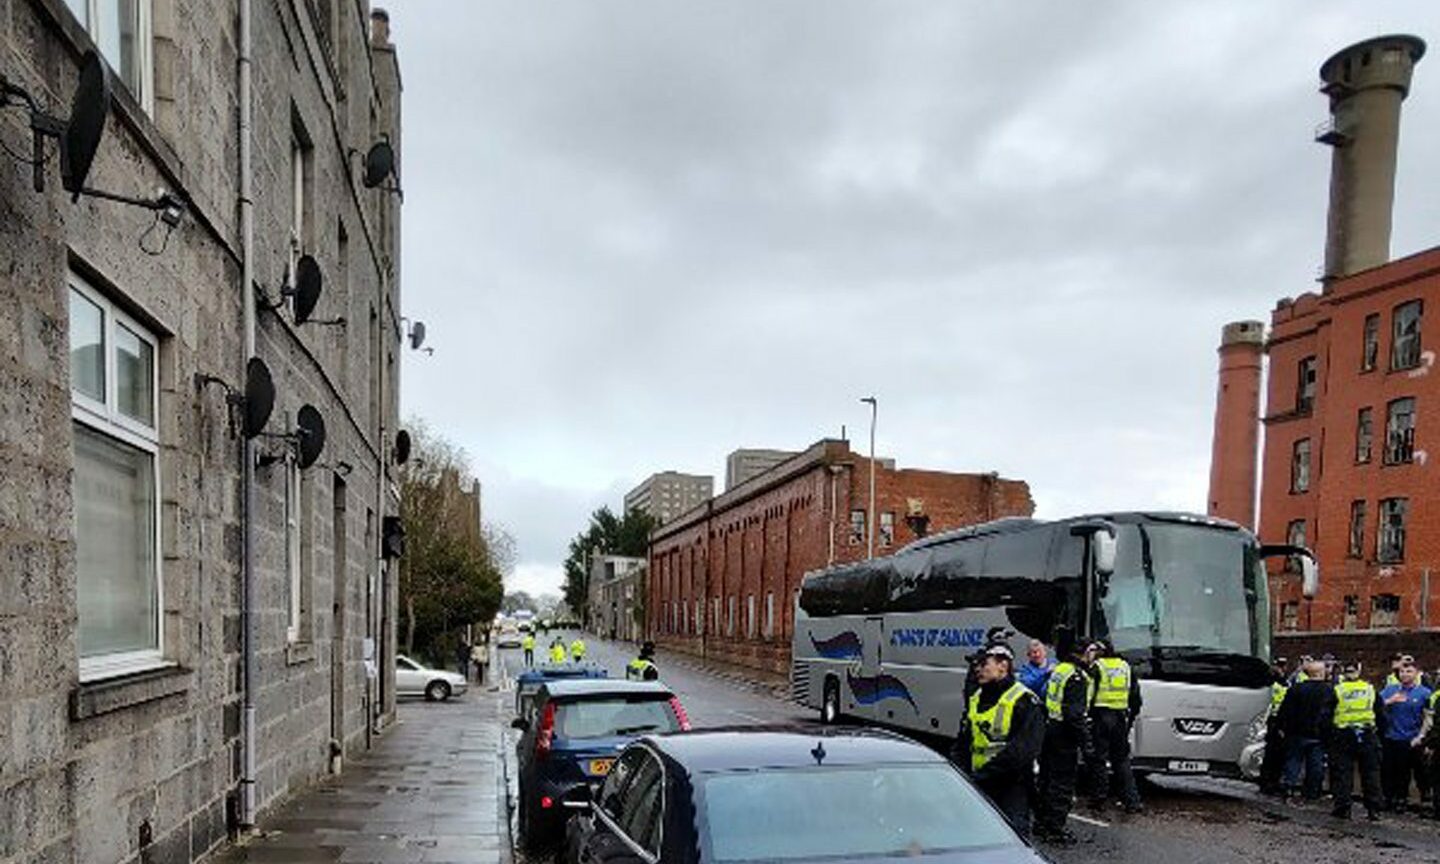 Police were called to reports of a disturbance on Hutcheon Street after the football match on April 23. Image: Supplied.